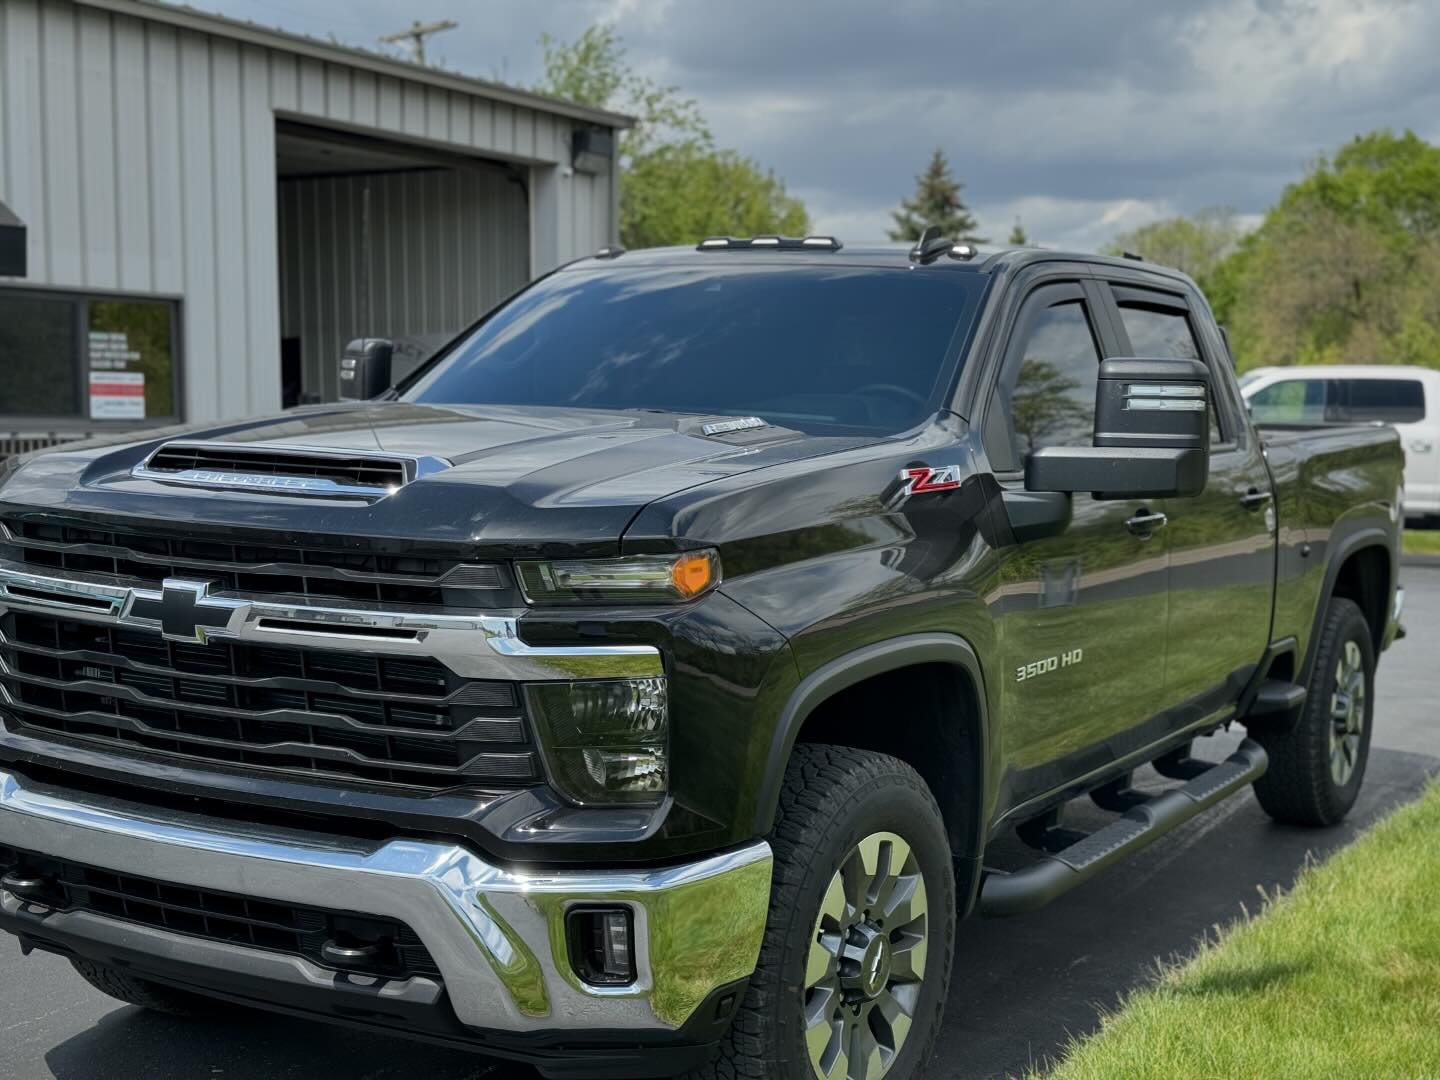 2024 Chevy Silverado 3500HD full cabin ceramic tint 15% sides, rear and 35% windshield. Who&rsquo;s next?